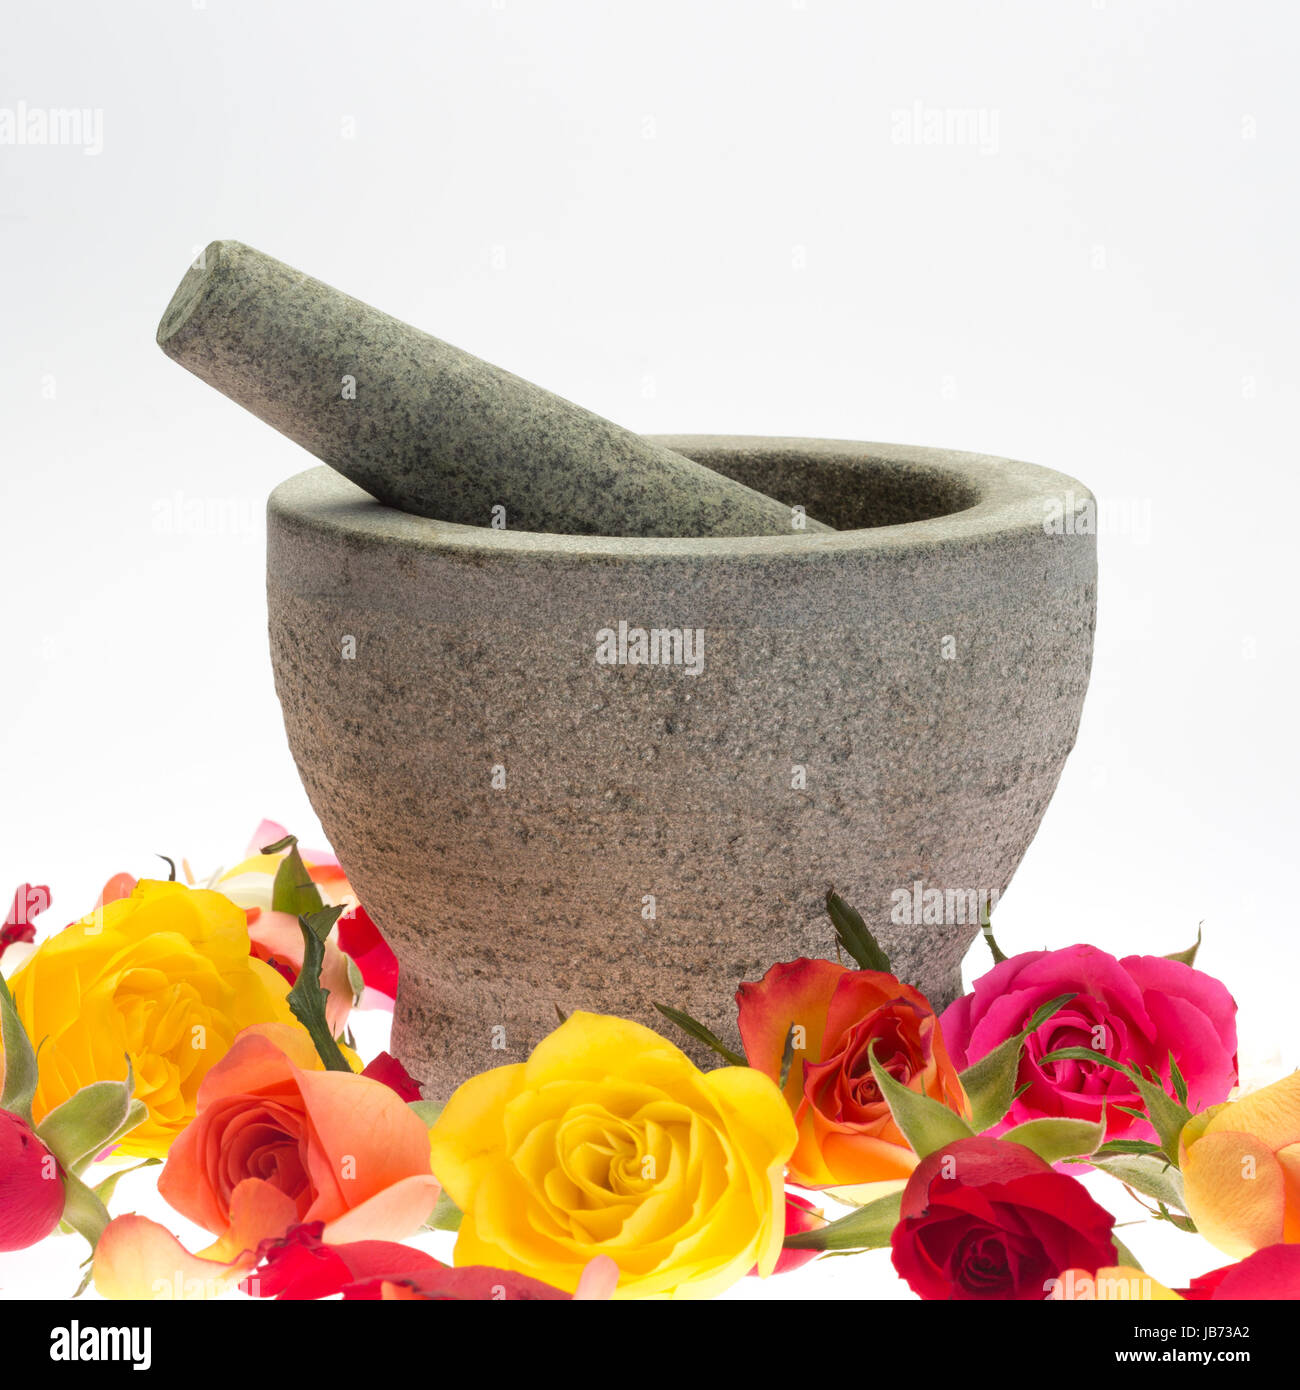 mortar with stösel stone in rose petals Stock Photo